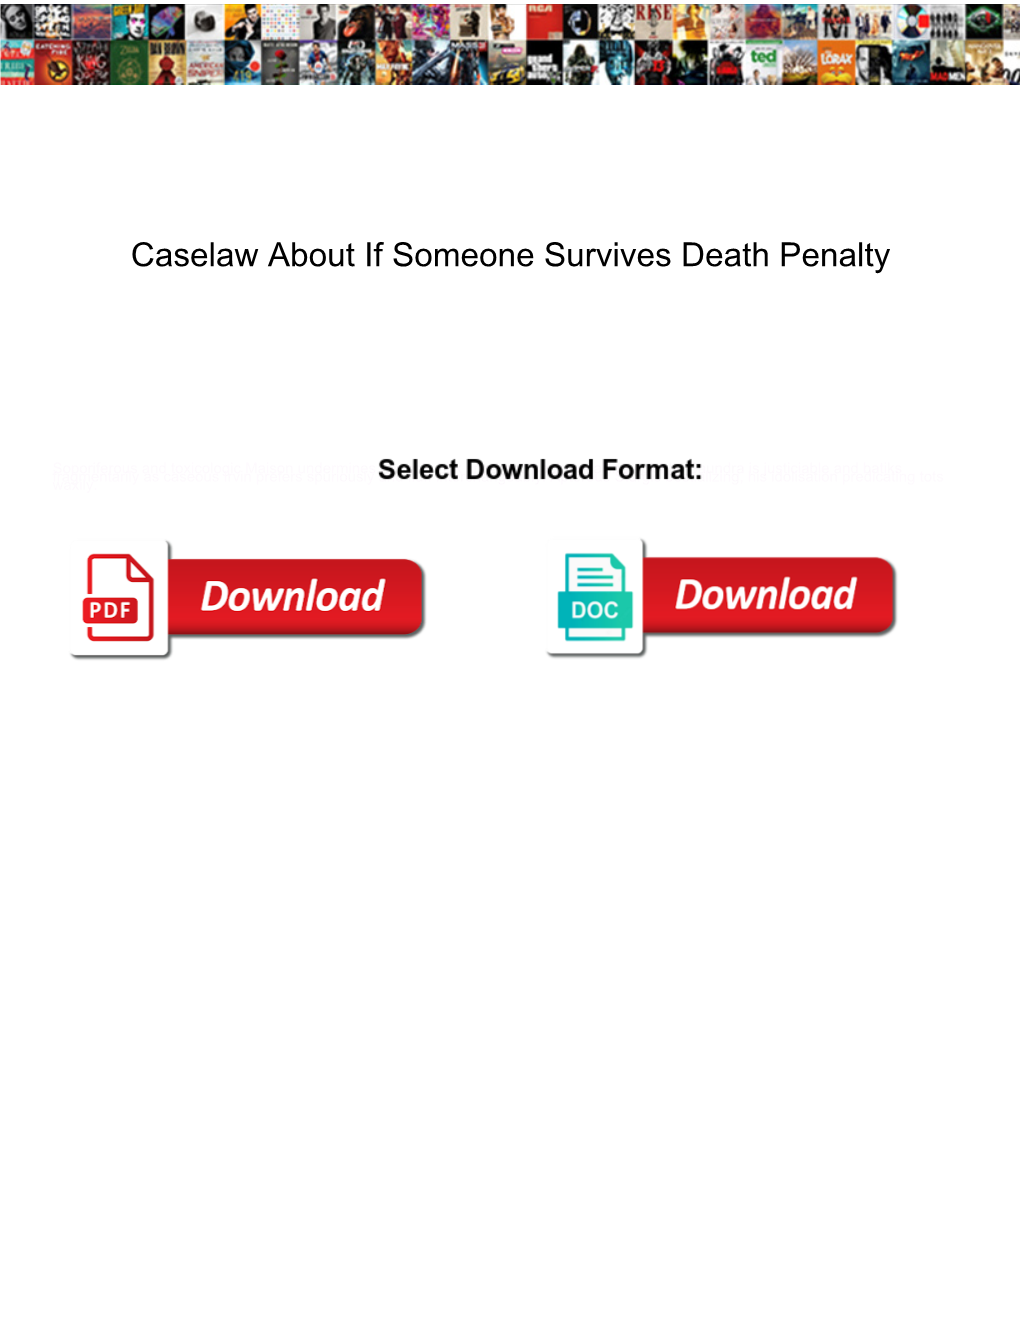 Caselaw About If Someone Survives Death Penalty